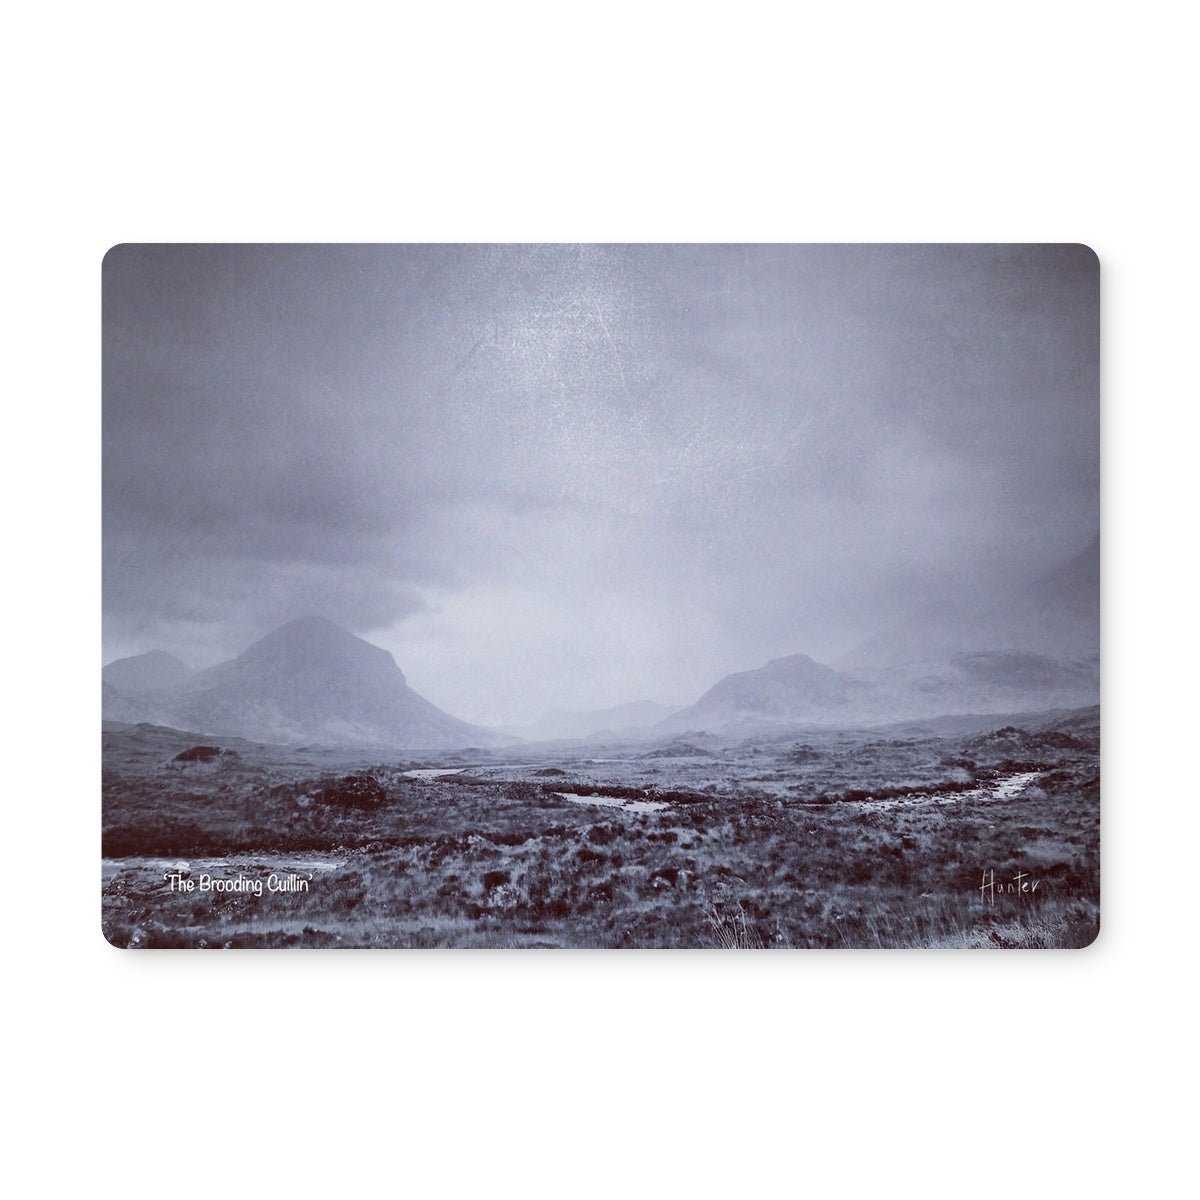 The Brooding Cuillin Skye Art Gifts Placemat-Placemats-Skye Art Gallery-Single Placemat-Paintings, Prints, Homeware, Art Gifts From Scotland By Scottish Artist Kevin Hunter